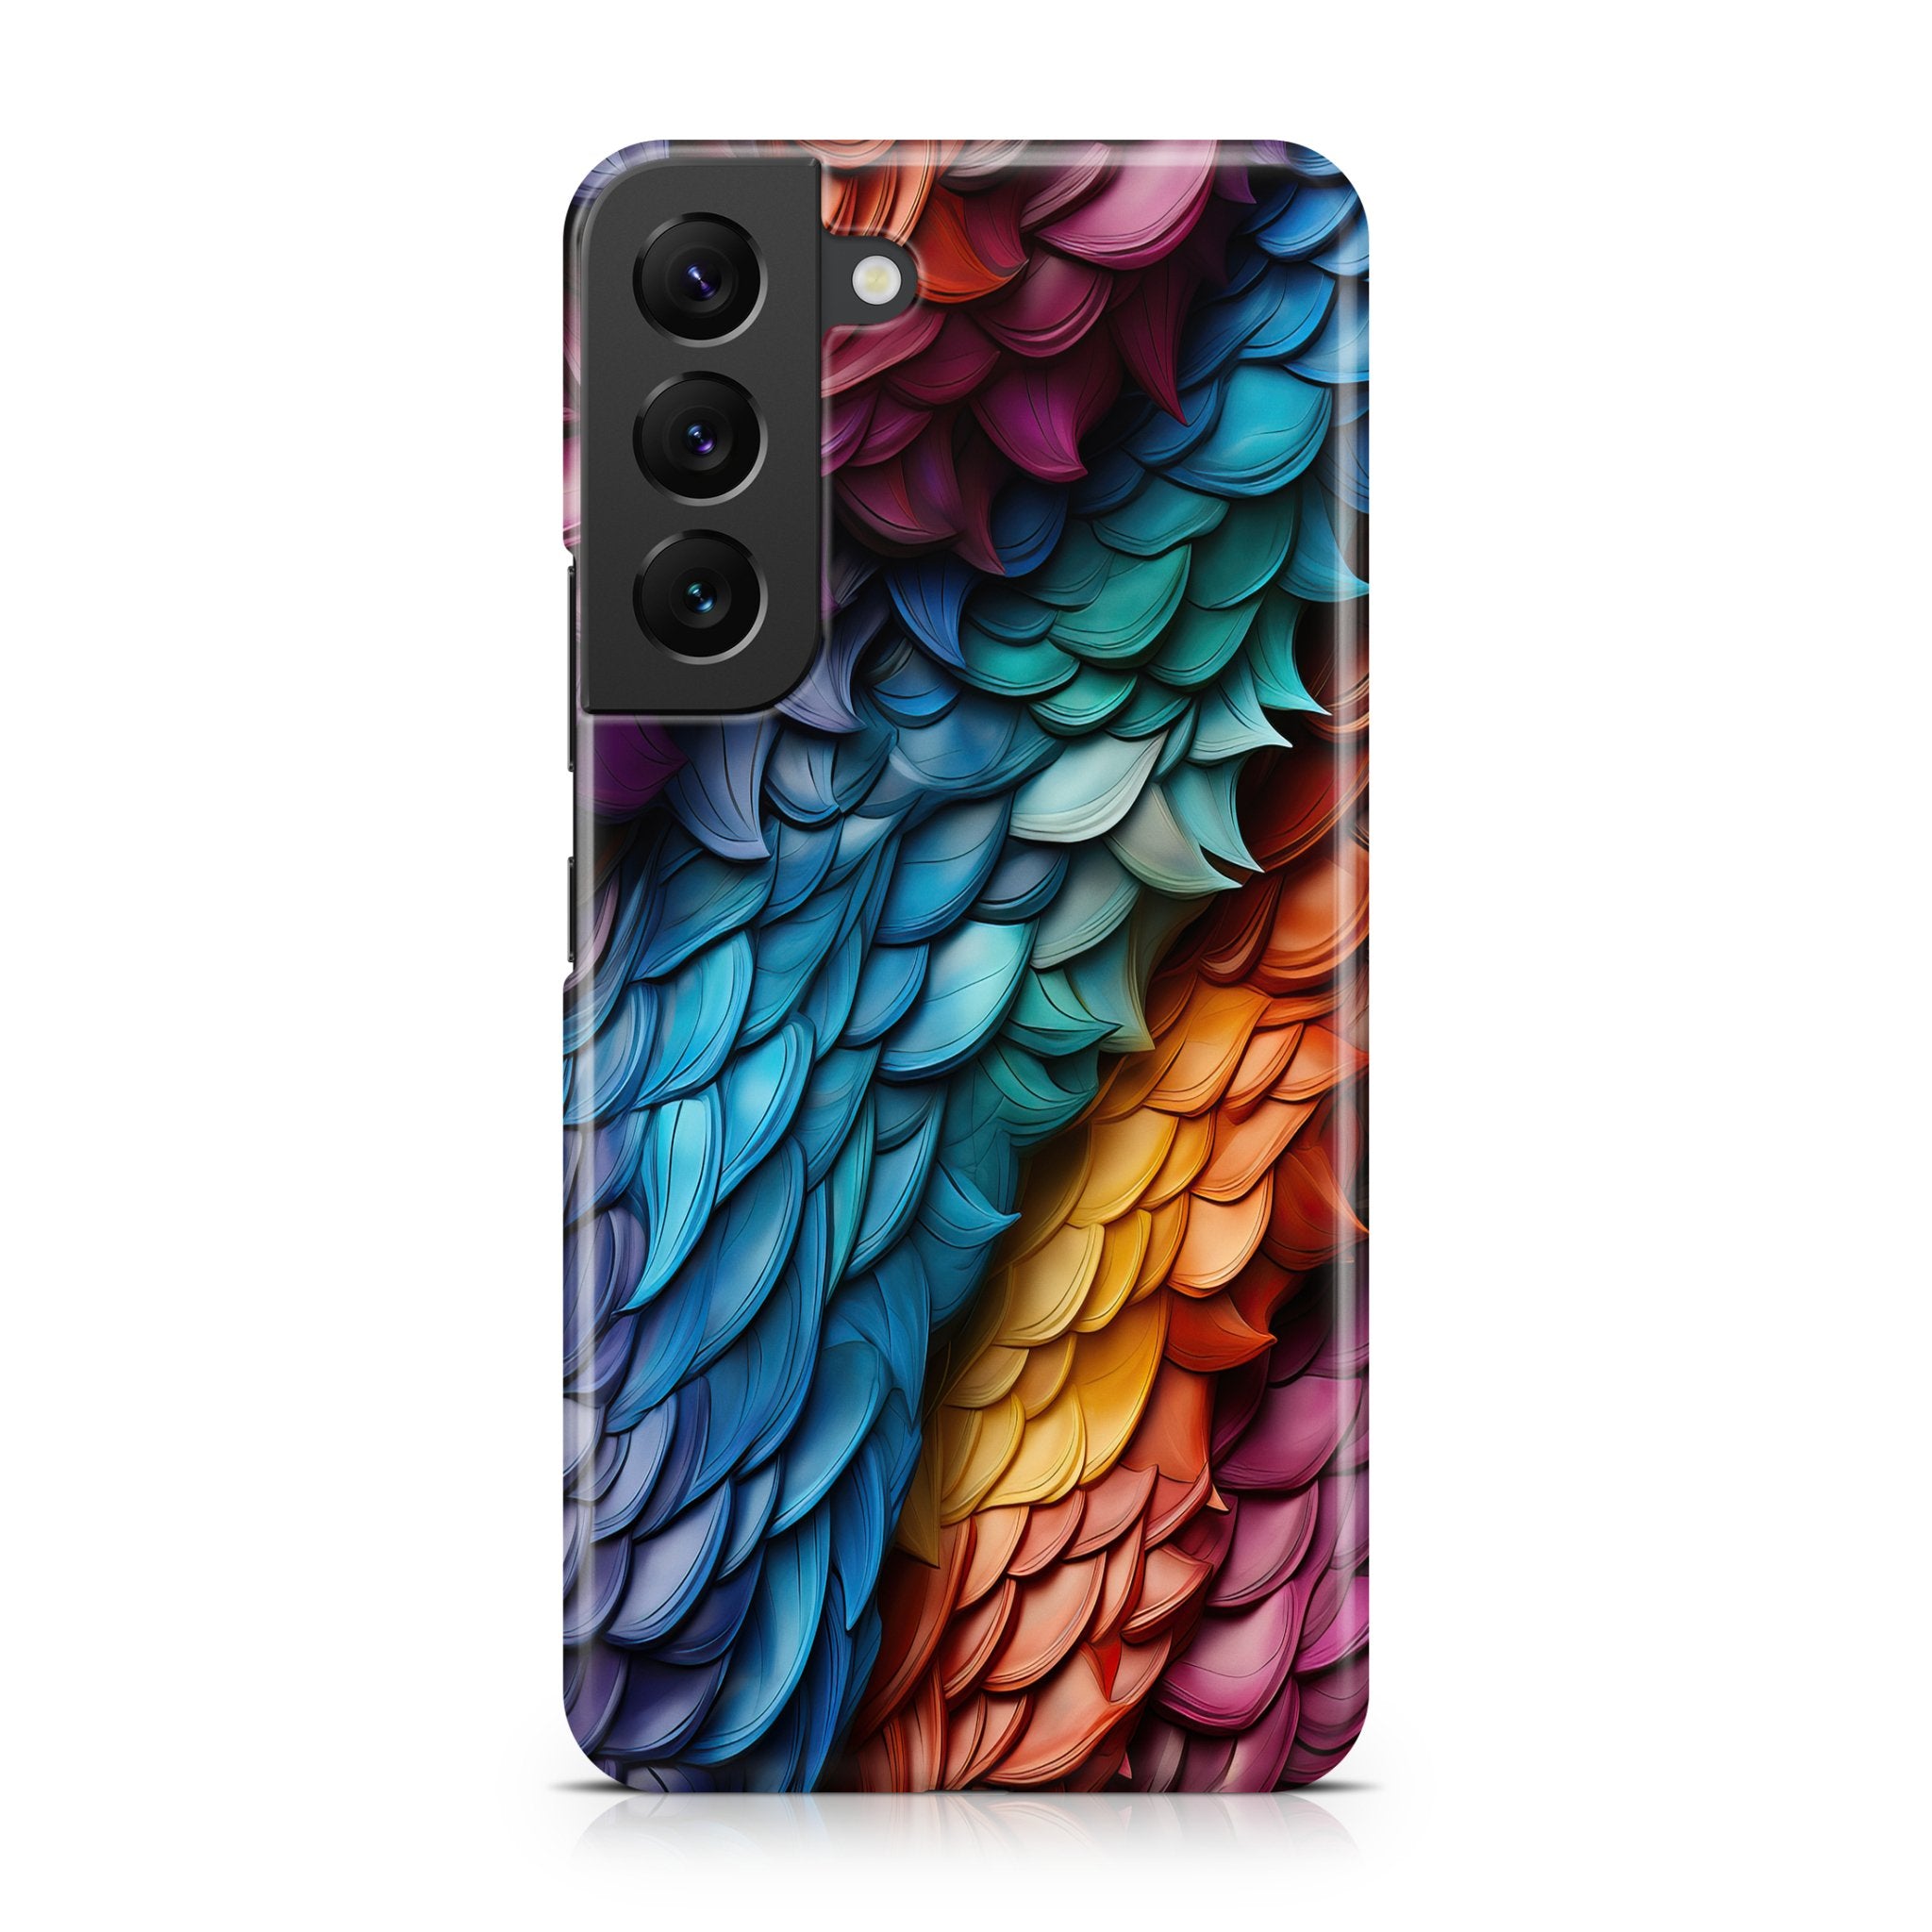 Rainbow Dragonscale - Samsung phone case designs by CaseSwagger